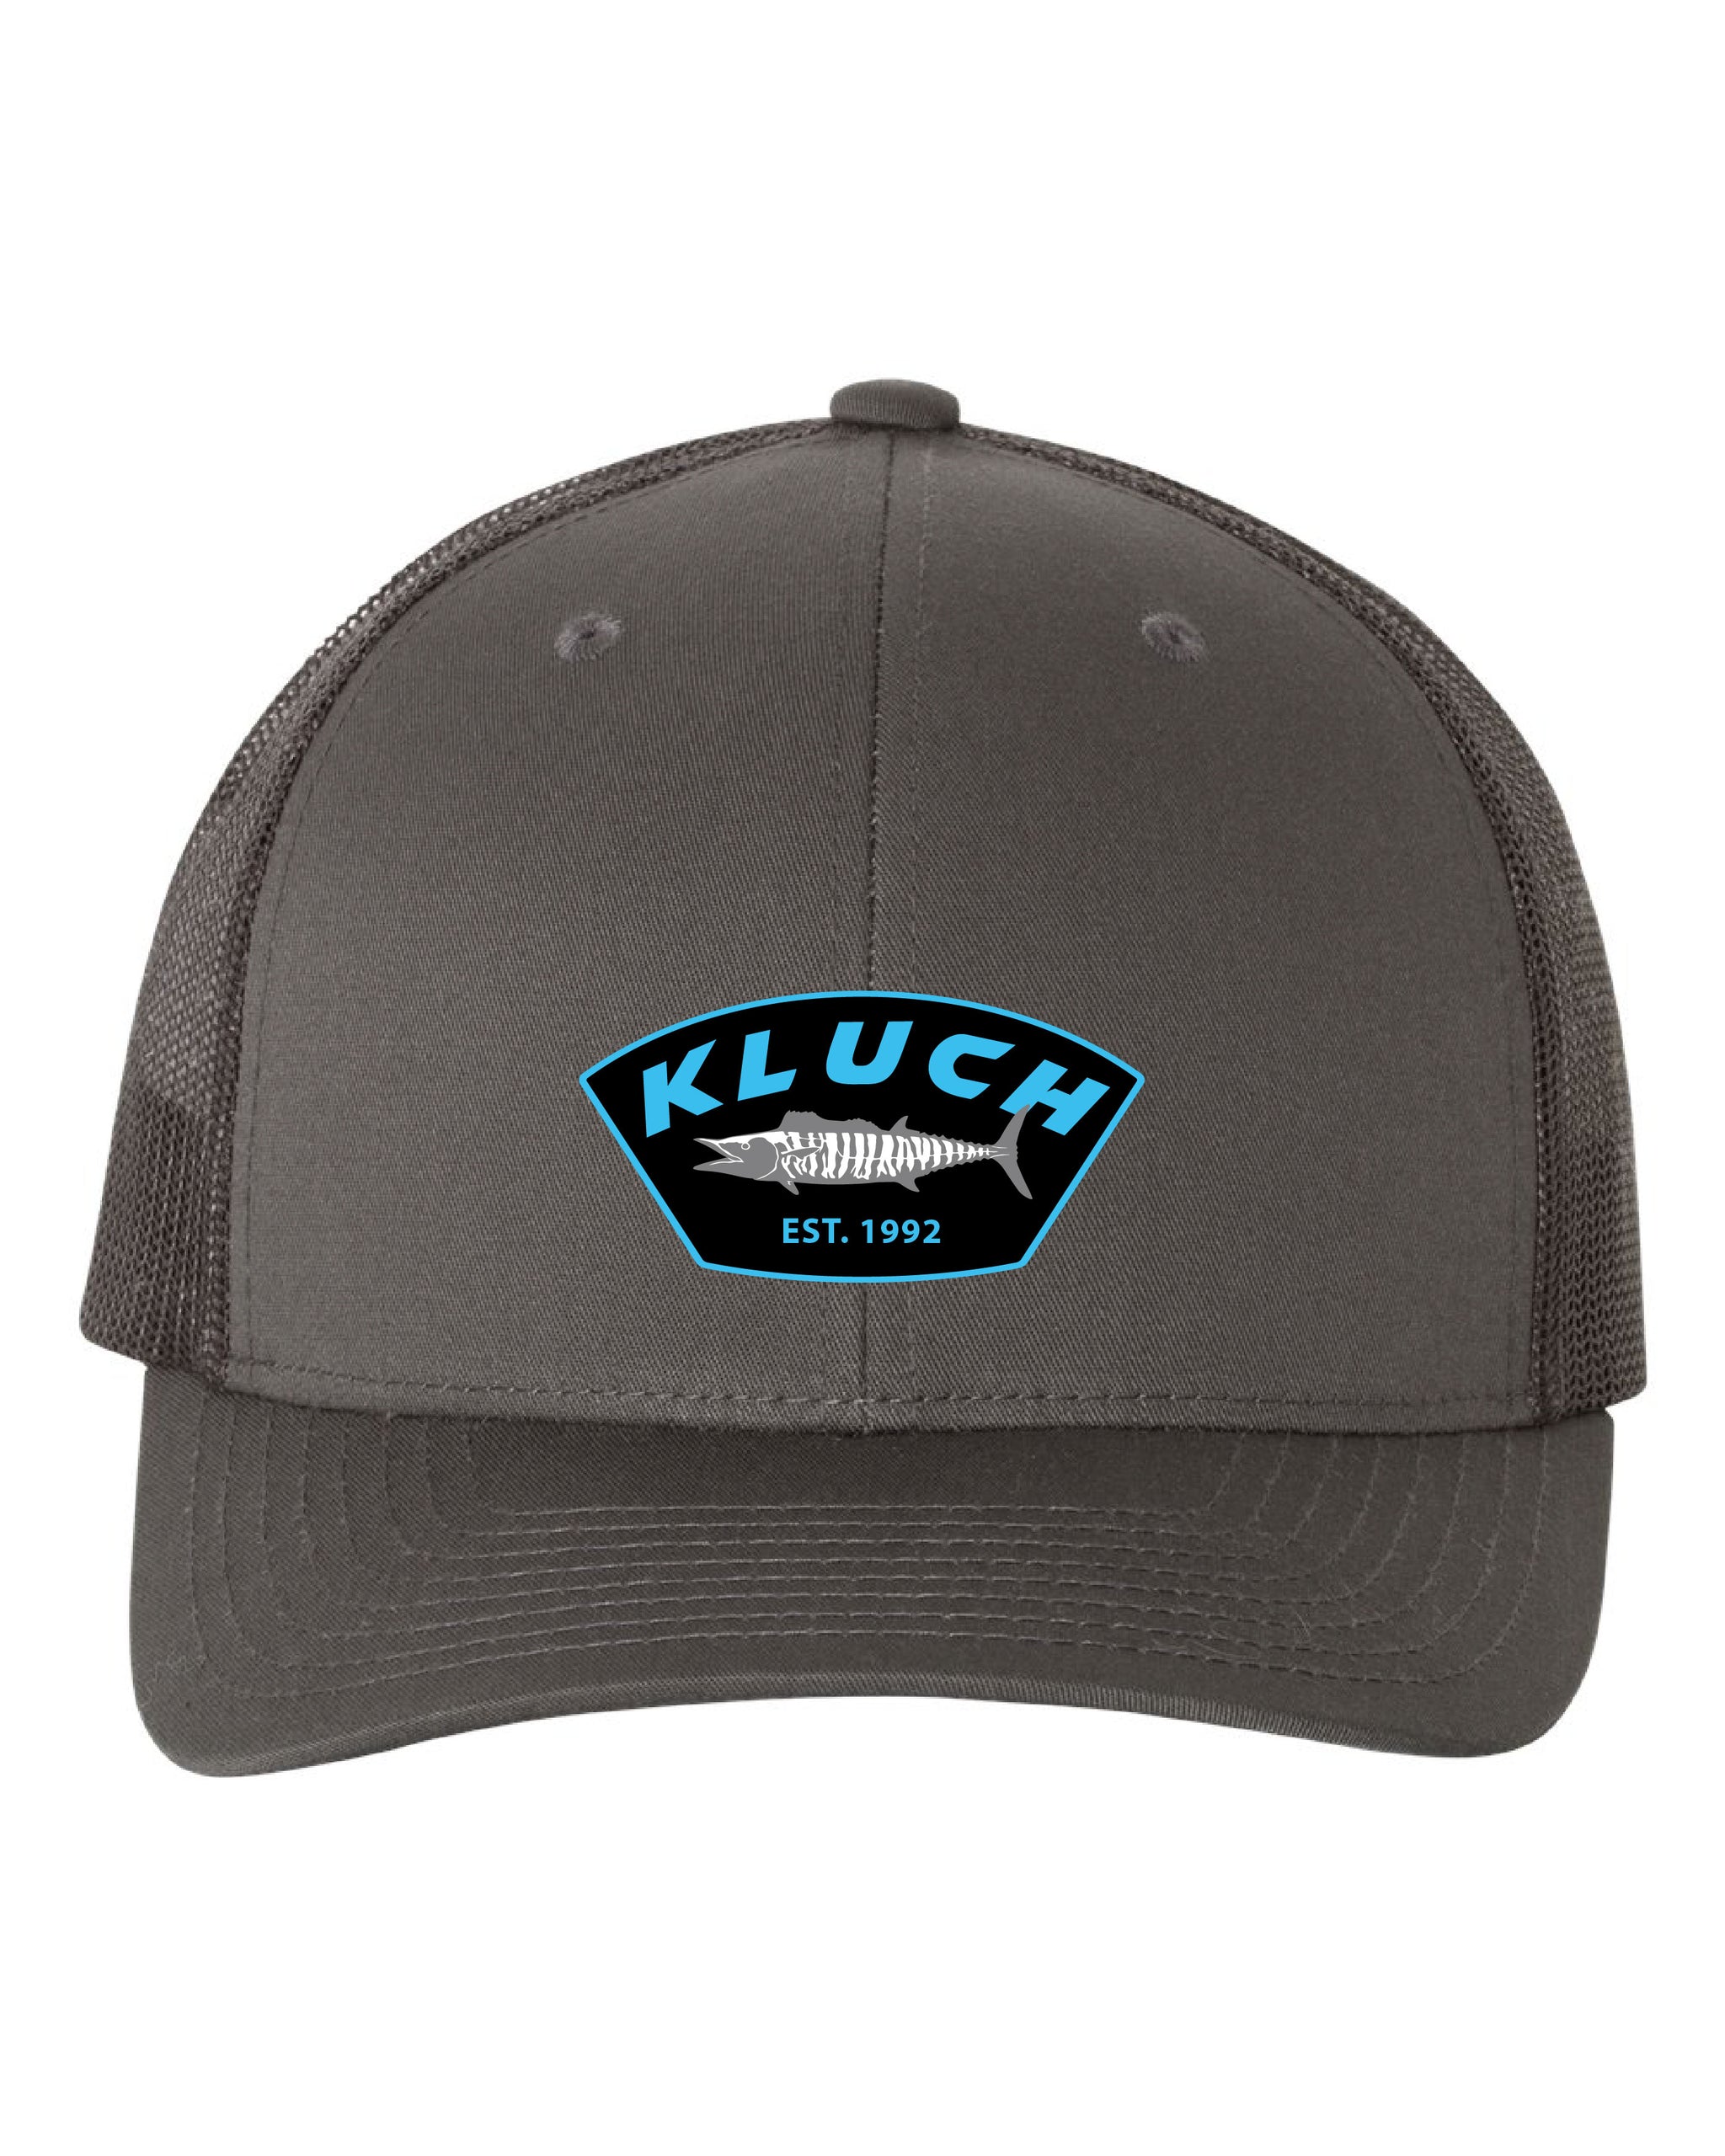 Kluch Adjustable Hats - Kluch Apparel